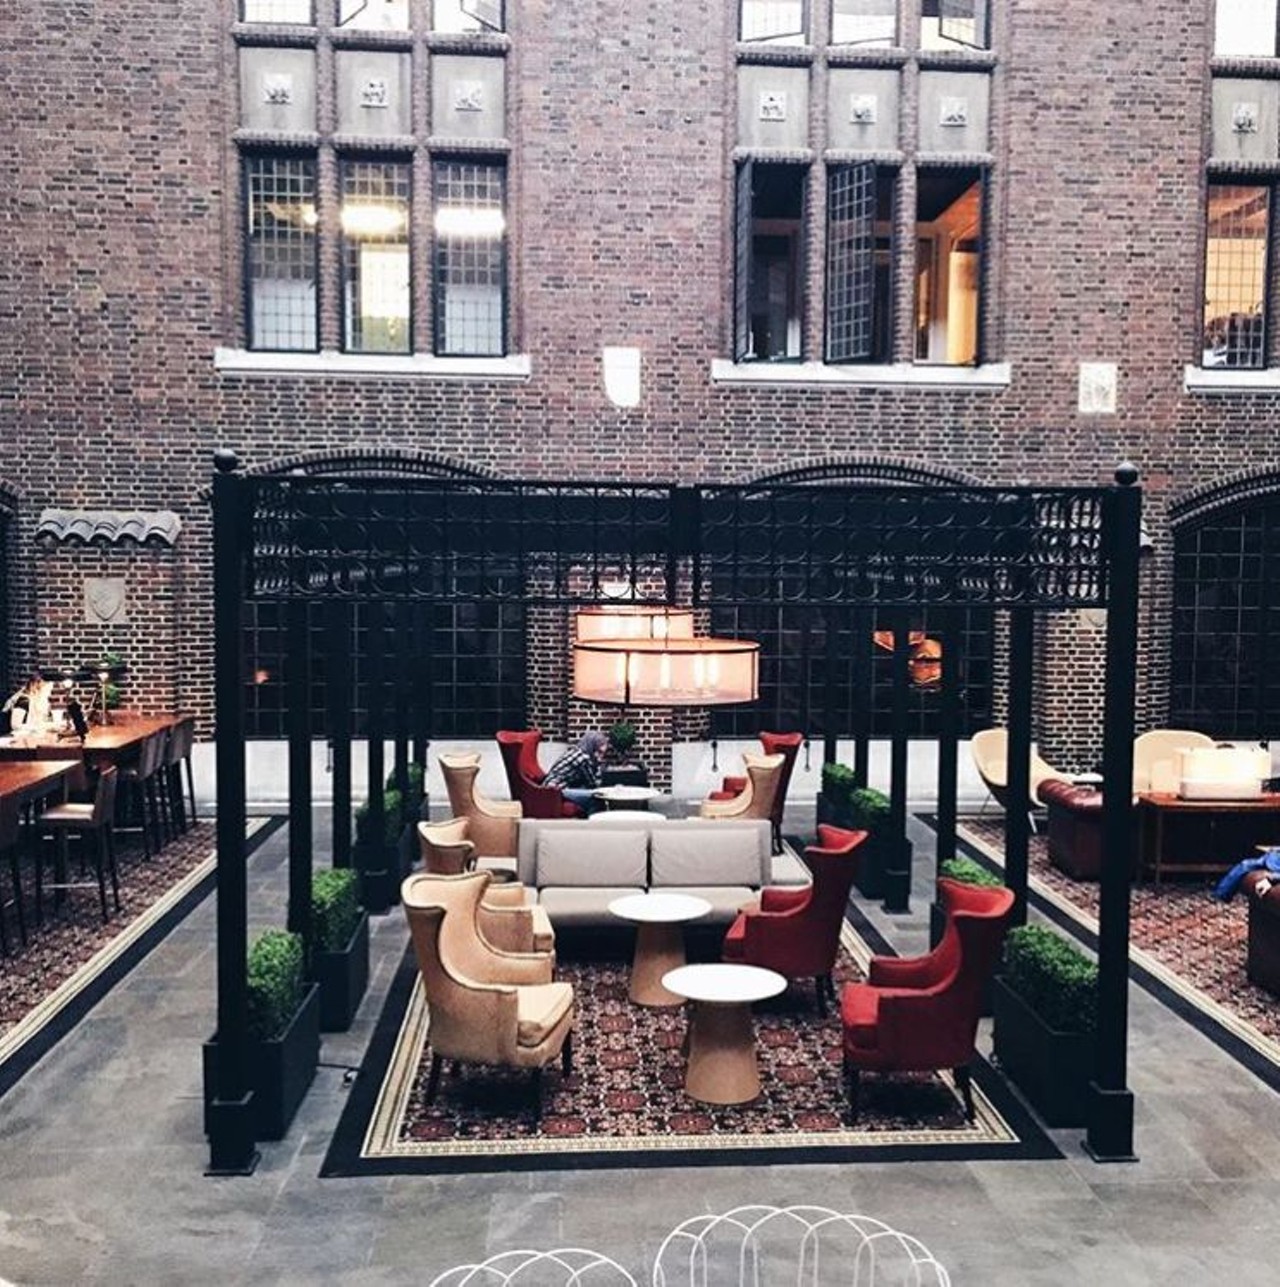  Kresge Court  
Kresge Court is perfect for when you want to be alone with a sandwich while sitting on a couch under a skylight. Granted, it can get busy, just keep your gaze down and don&#146;t make eye contact with anyone. 
Photo via Instagram, user vagababetravel  